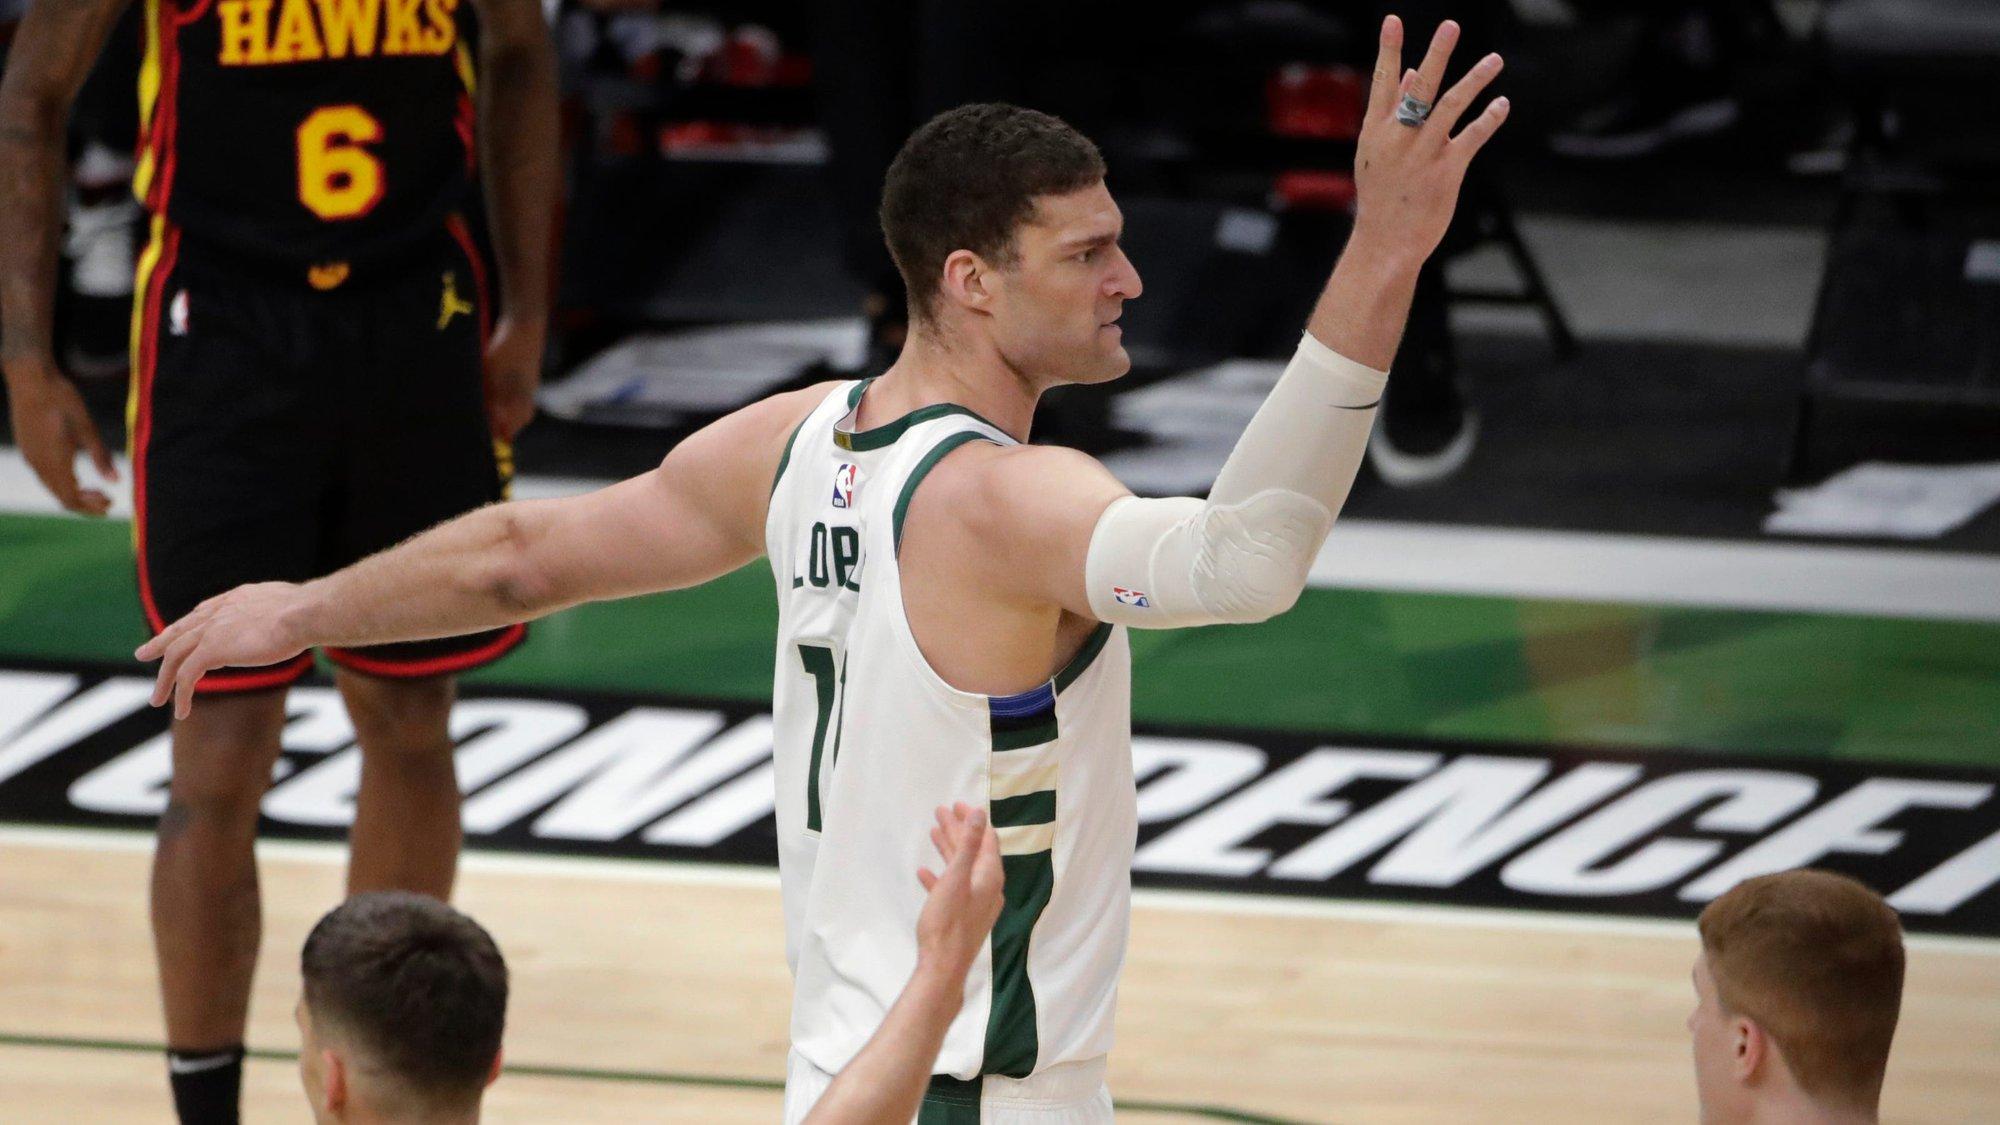 Bucks vs Hawks Game 6 Betting Preview: Will the Return of Trae or Giannis Swing the Series?